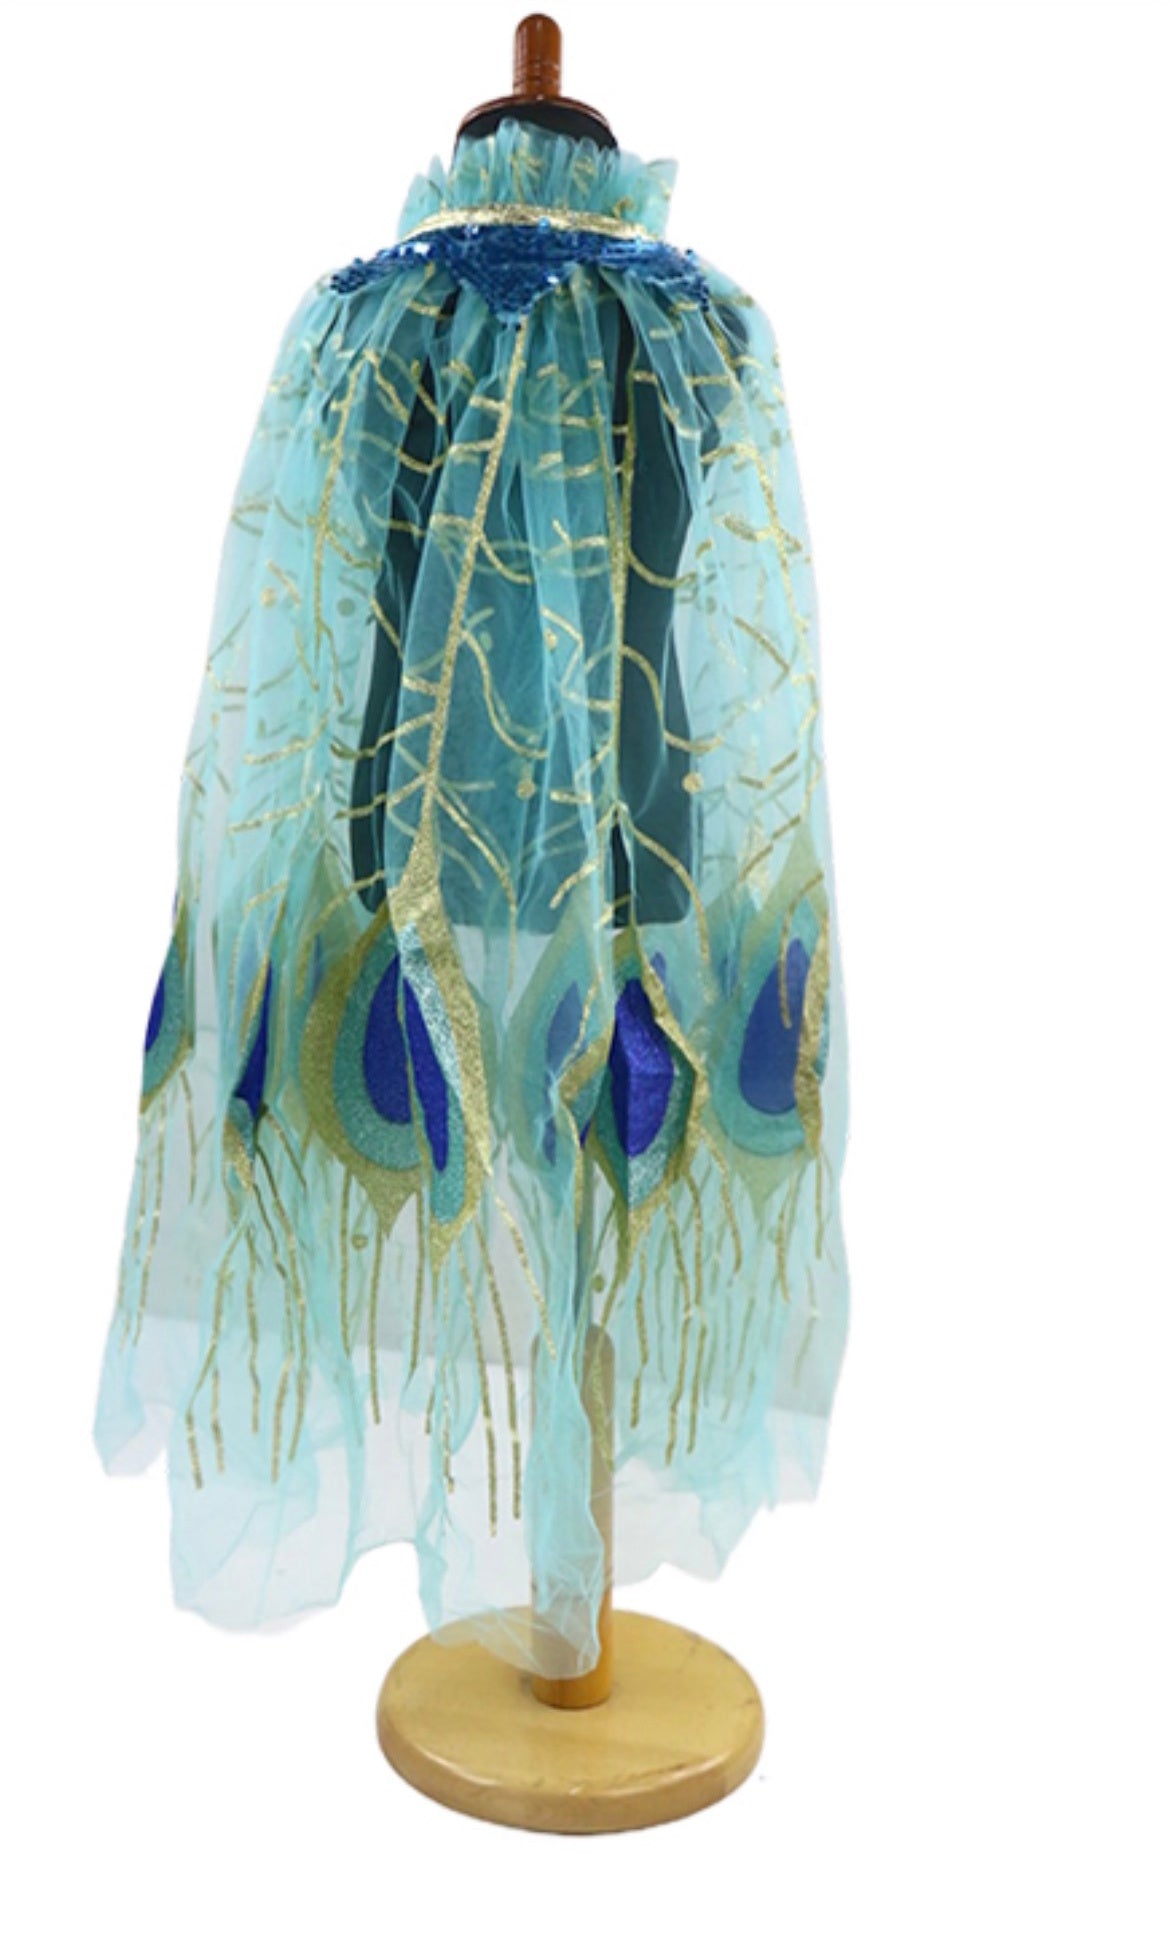 Girls Fun Theme Park Princess Capes - Turquoise Peacock Feathers - tulle cape - tie neck with soft bobbles